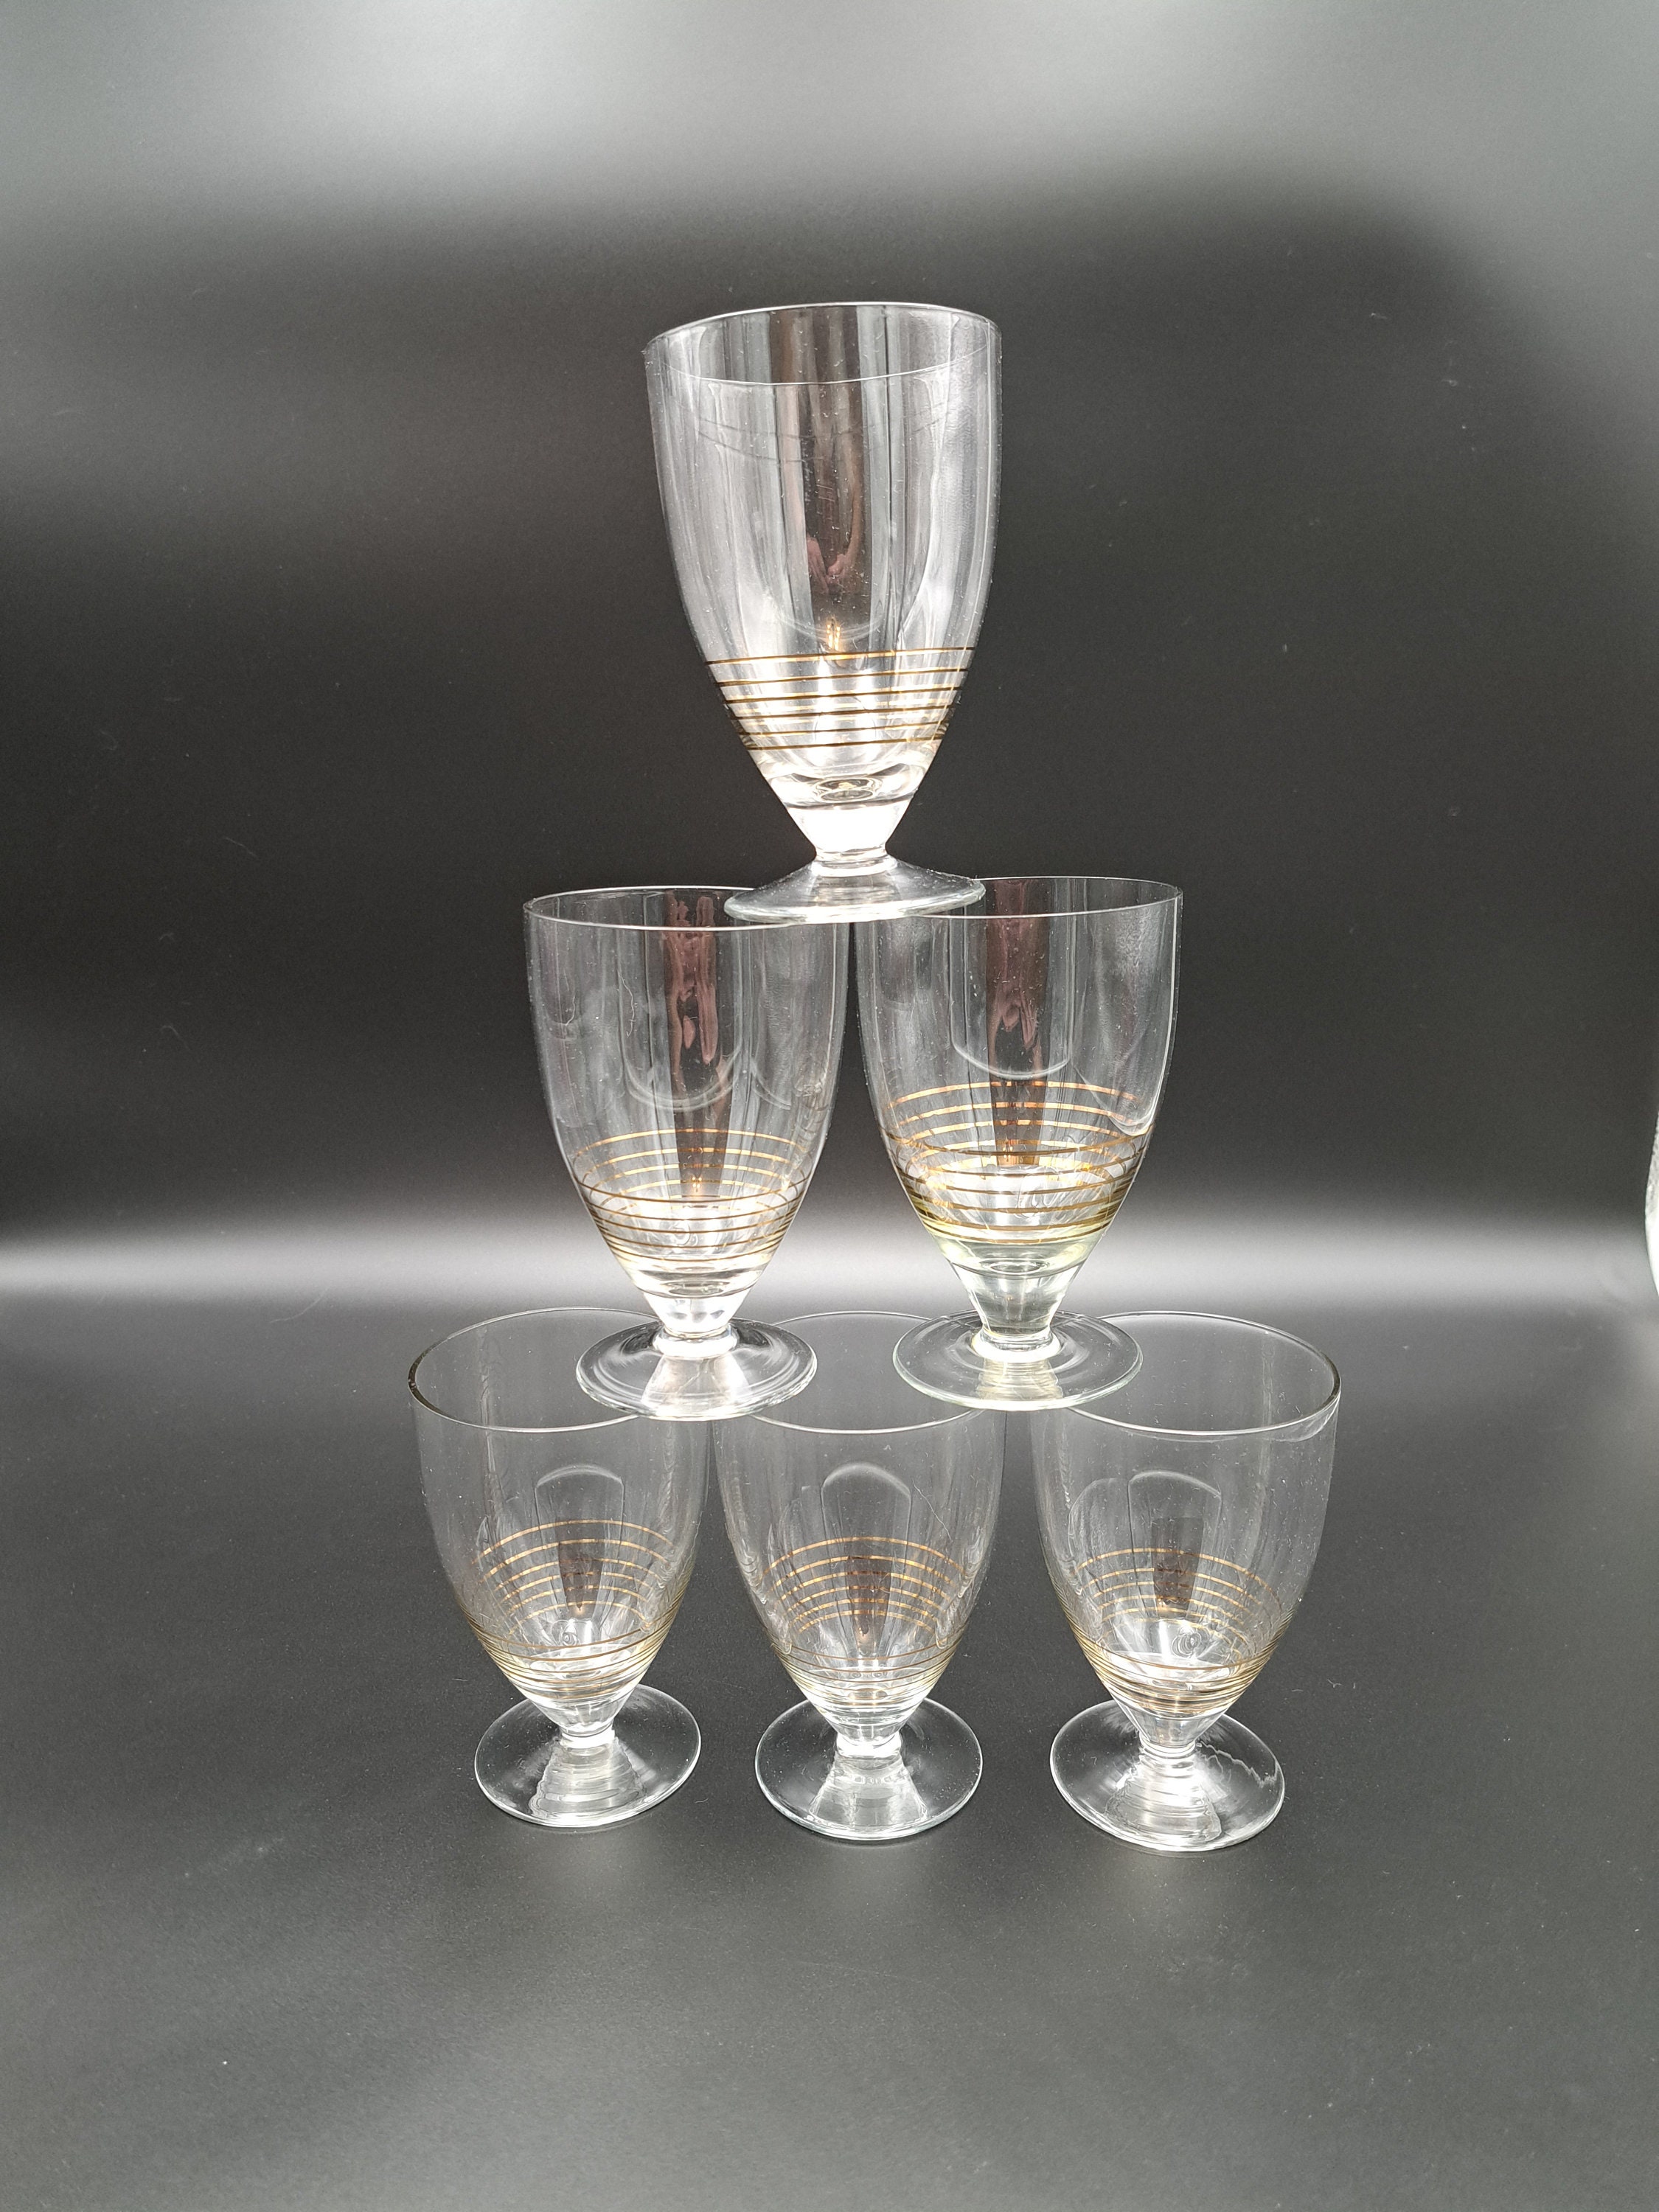 Khen Old-Fashioned Drinking Glasses | Set of 6 | 9.6 OZ Vintage Classic  Glassware For Drinks, Muted …See more Khen Old-Fashioned Drinking Glasses 